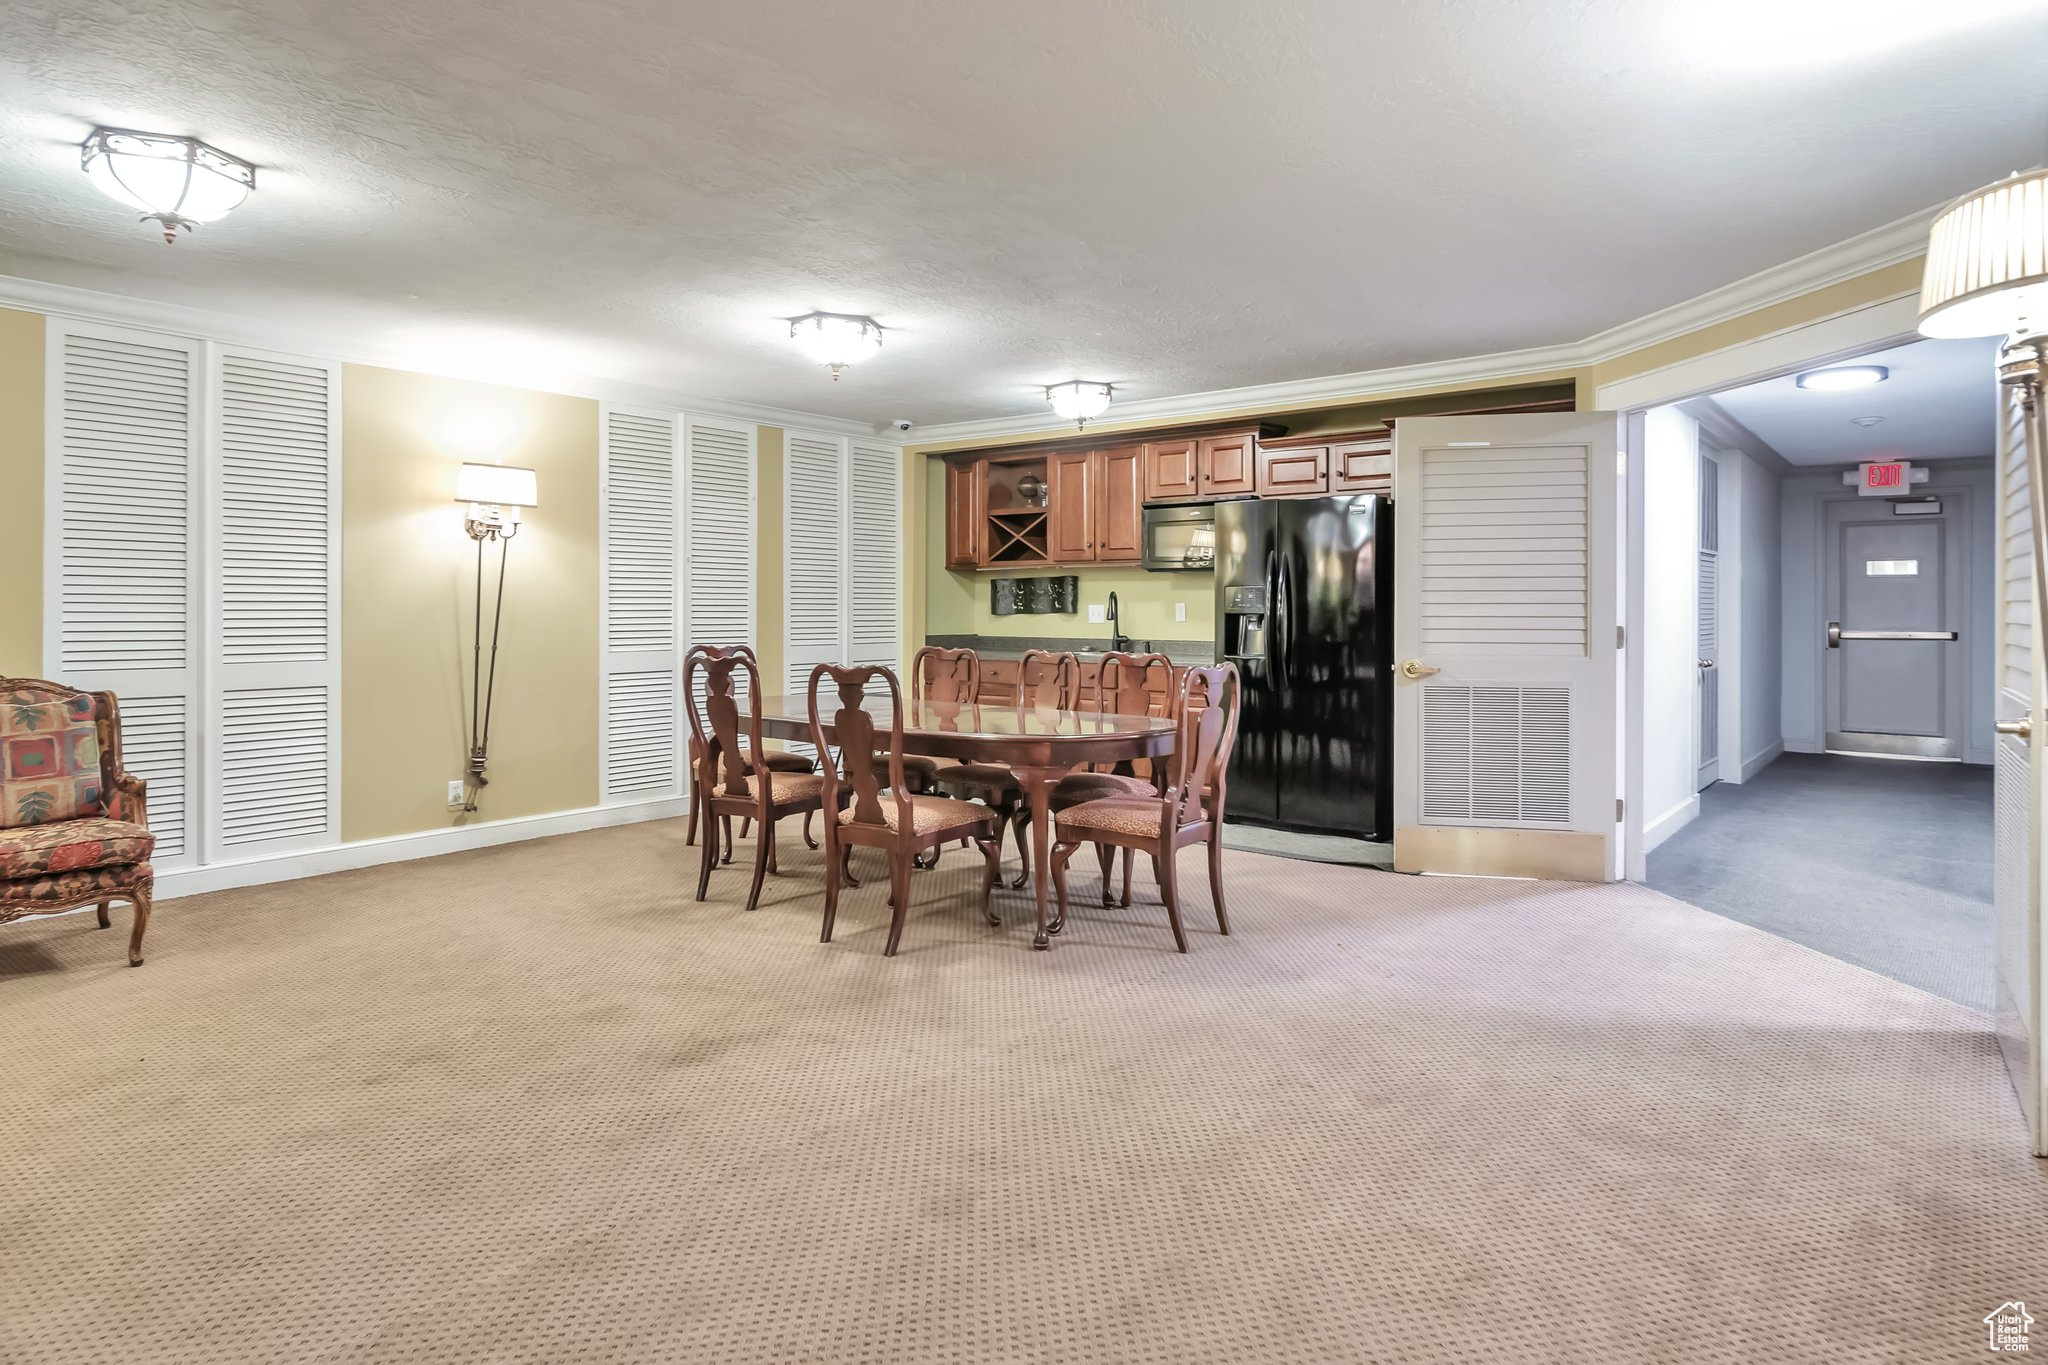 Common area carpeted dining space with ornamental molding